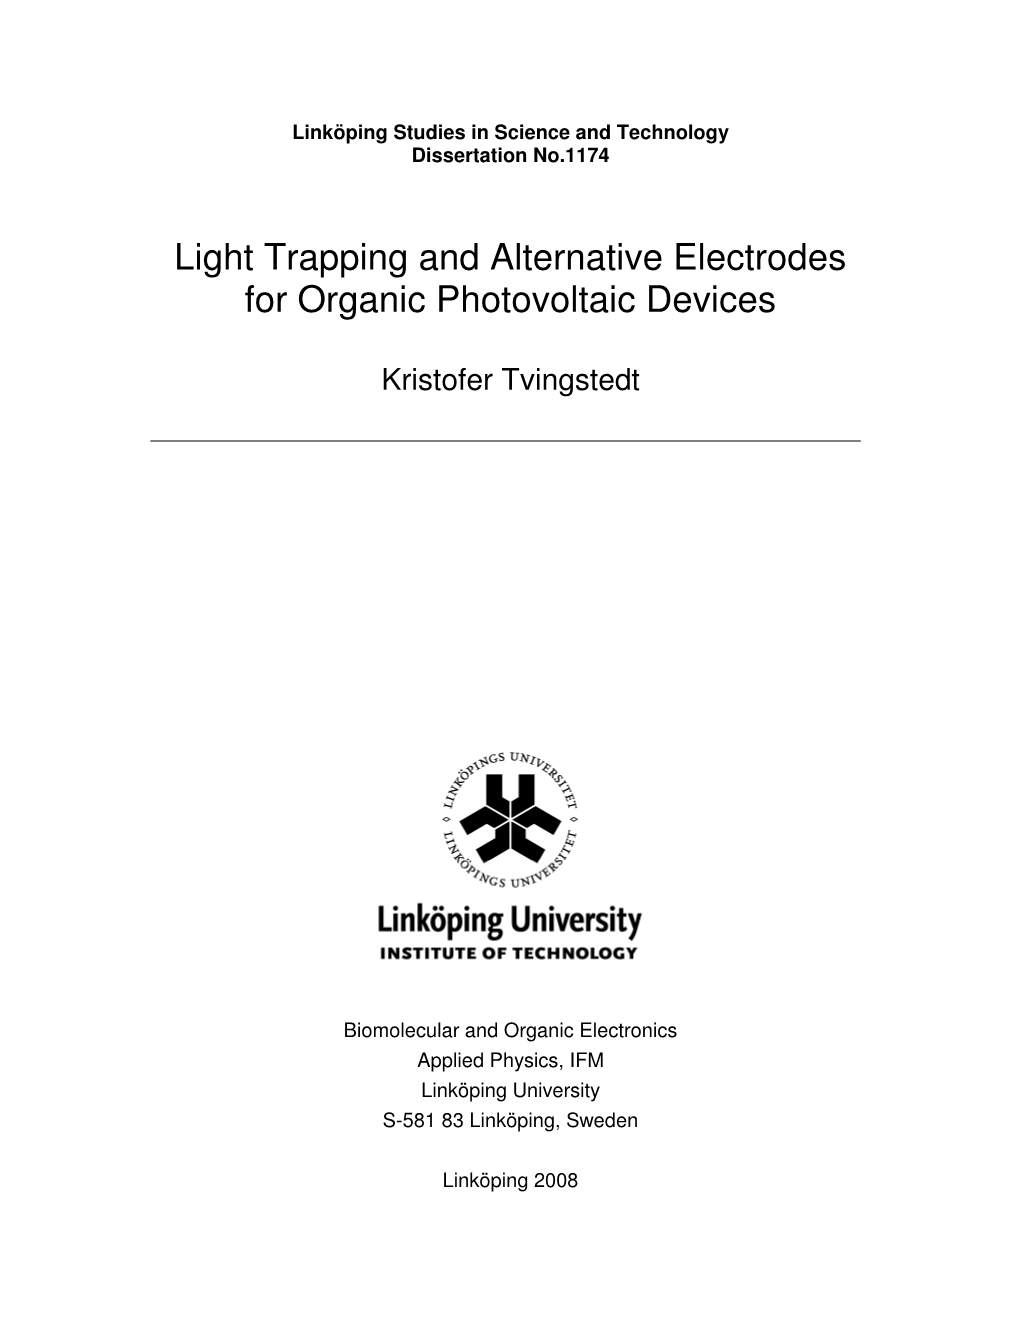 Light Trapping and Alternative Electrodes for Organic Photovoltaic Devices